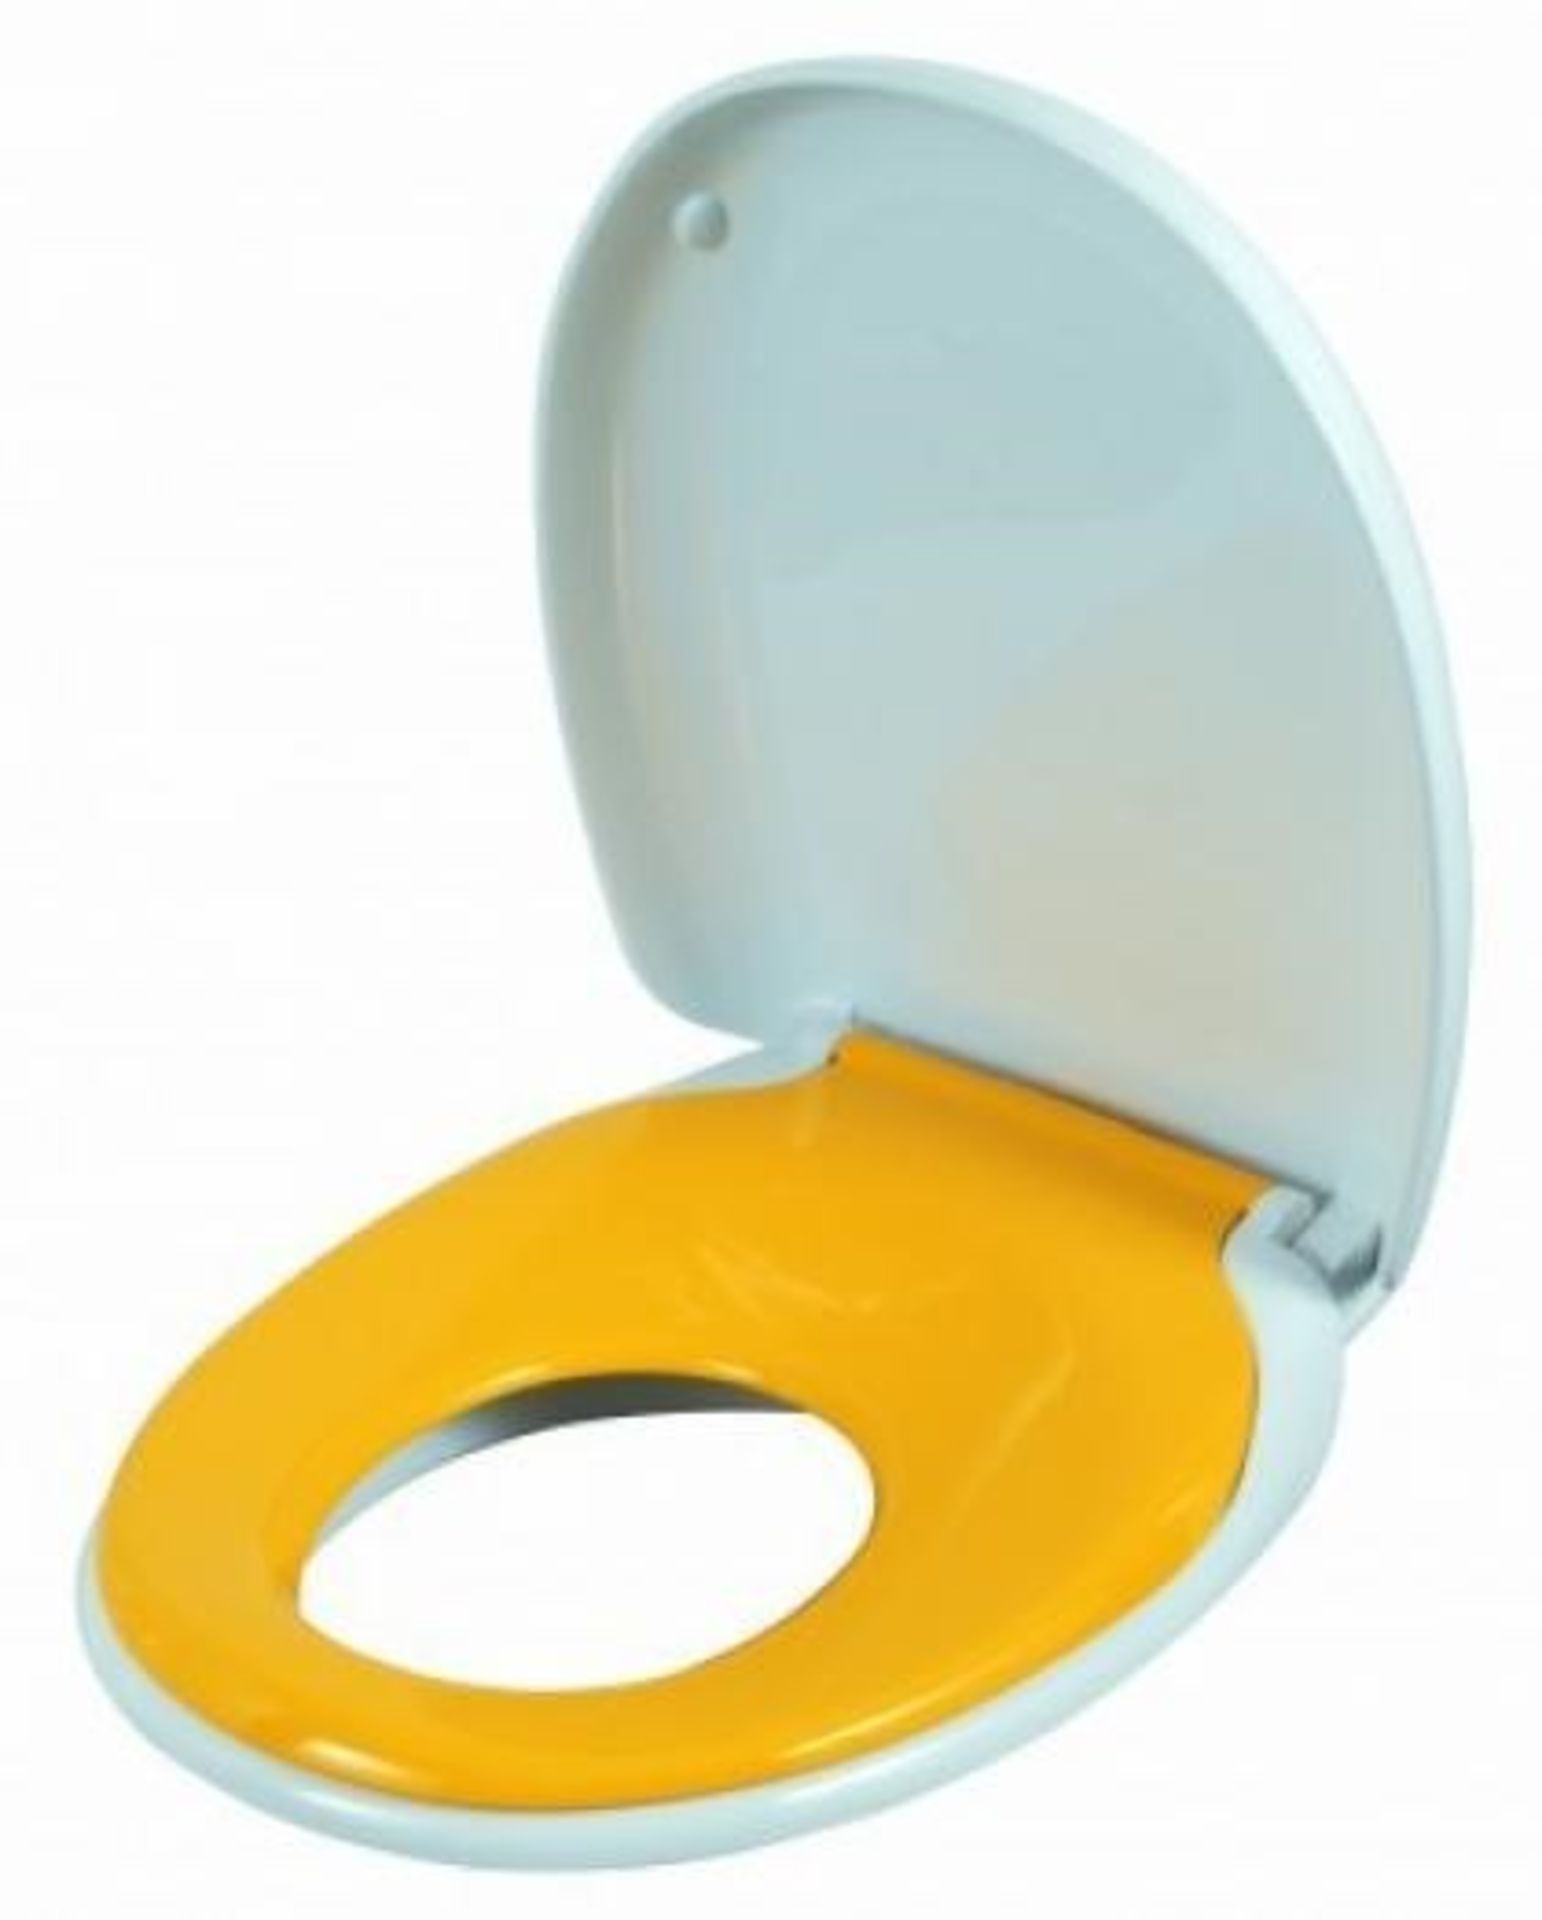 5 x Dubaloo 2 in 1 Family Training Toilet Seats - One Seat For All The Family - Full Size Toilet